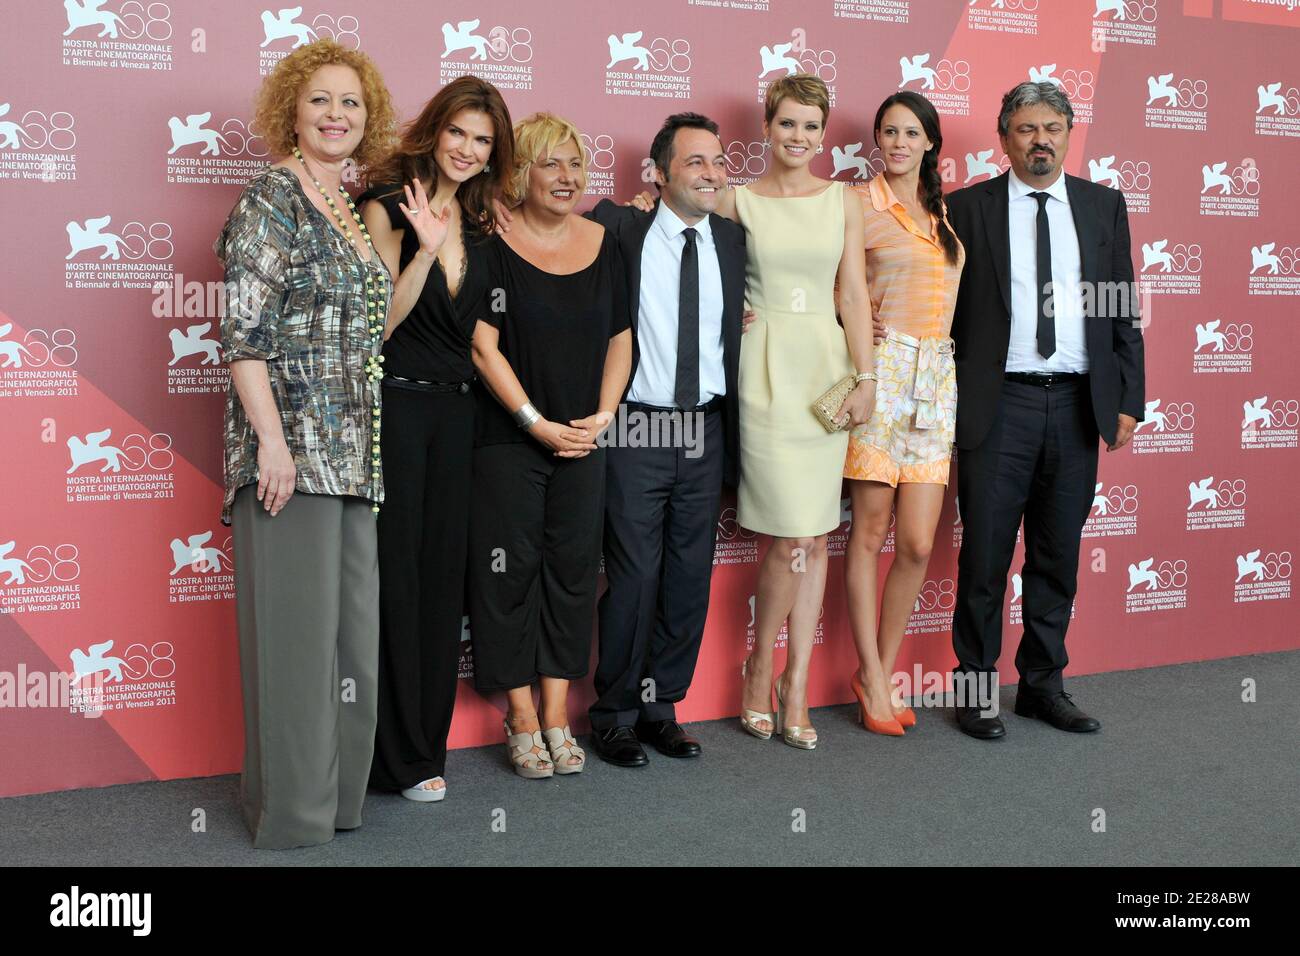 Actors Chiara Martegiani, Monica Barladeanu, Andrea Osvart, director Fabrizio Cattani and actress Marina Pennafina pose during the premiere of his film 'Maternity Blues' at the 68th International Film Festival in Venice, Italy, 7 September 2011. In the Spanish science-fiction drama, Bruehl plays the role of a scientist who develops robots. Photo by Aurore Marechal/ABACAPRESS.COM Stock Photo